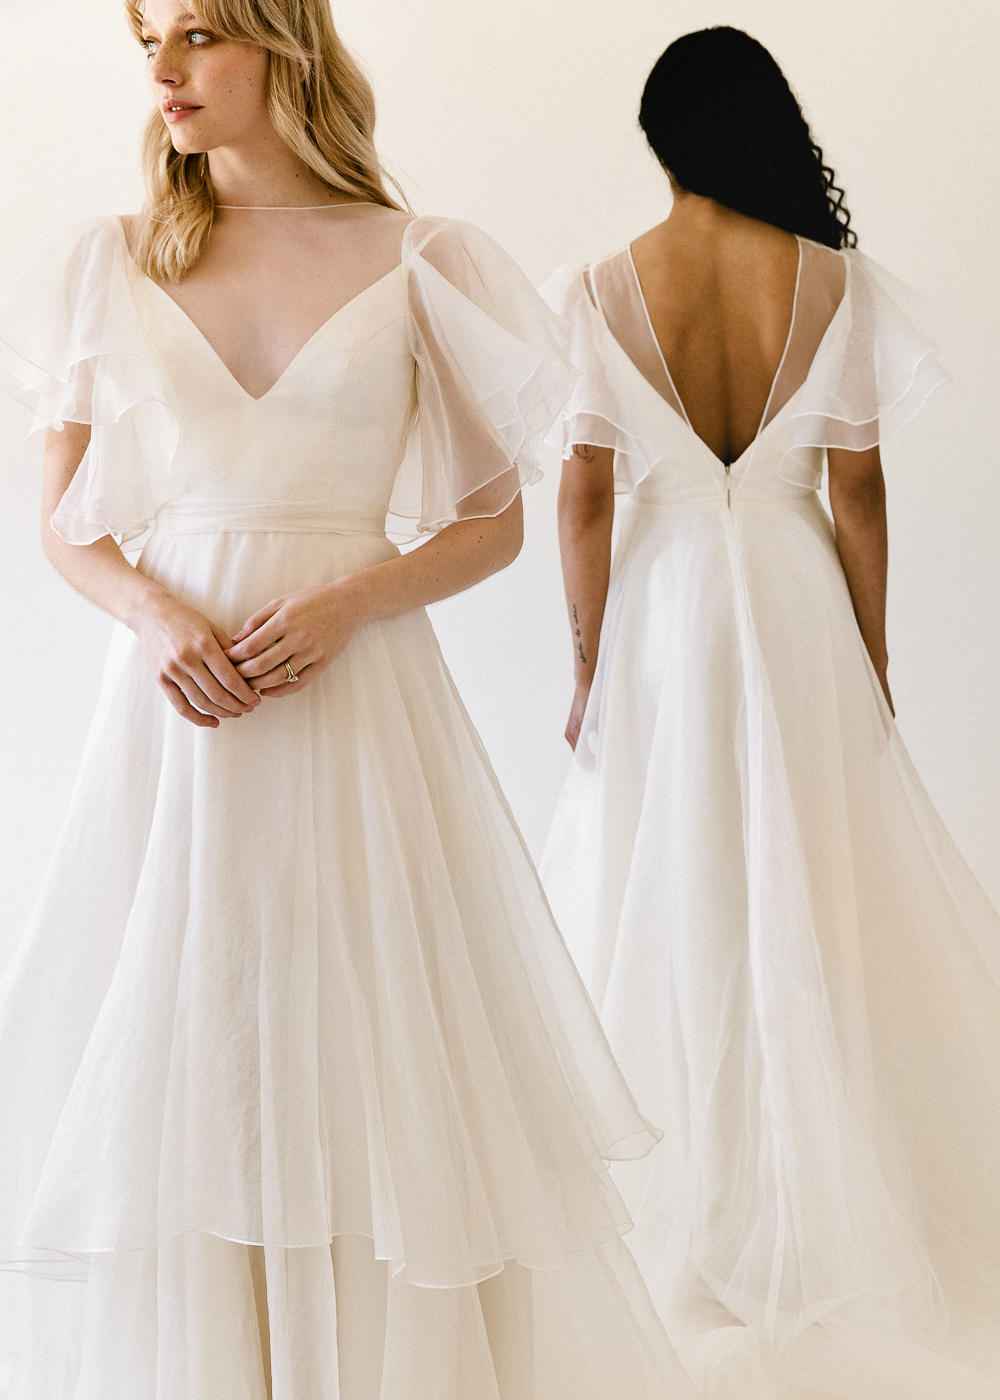 2022 Bridal Collections From Laudae, Aesling and Truvelle Showcase Chic Silhouettes and Size Inclusivity Featured by Brontë Bride